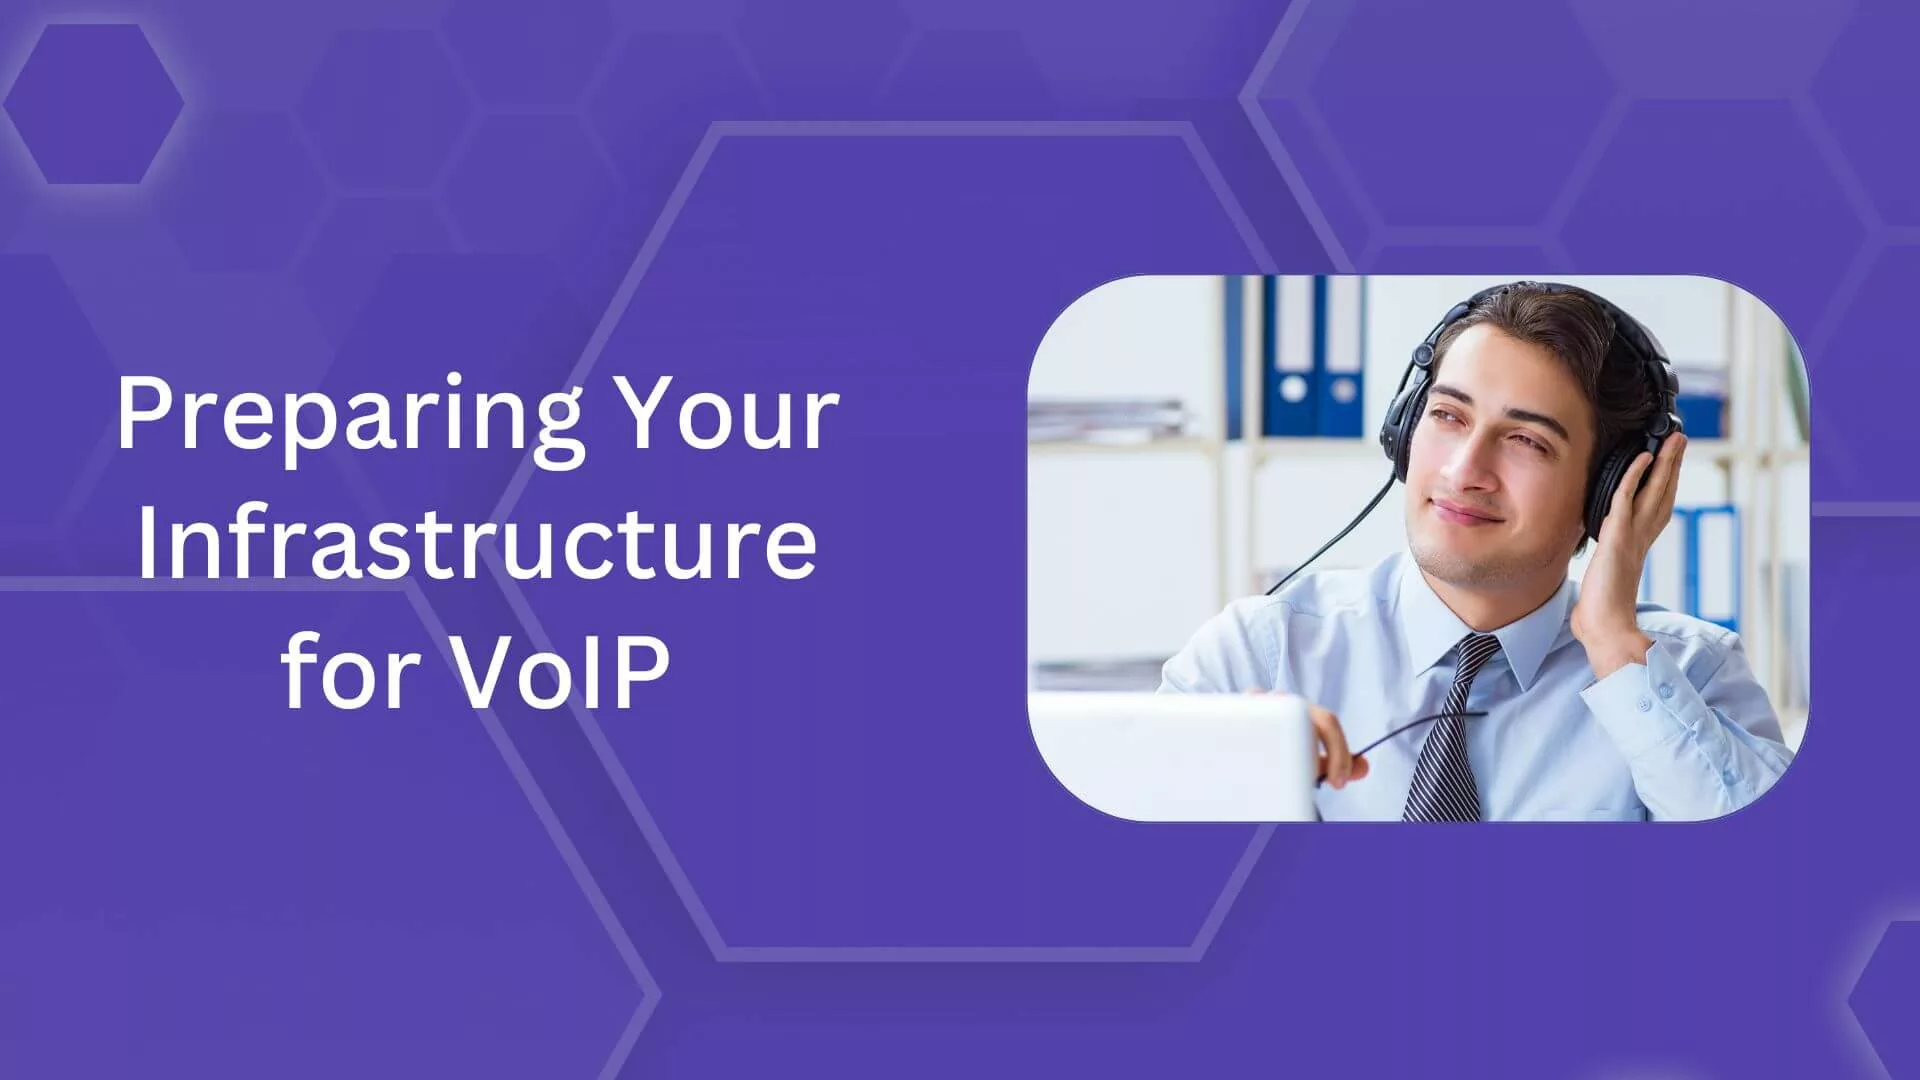 Preparing Your Infrastructure for VoIP